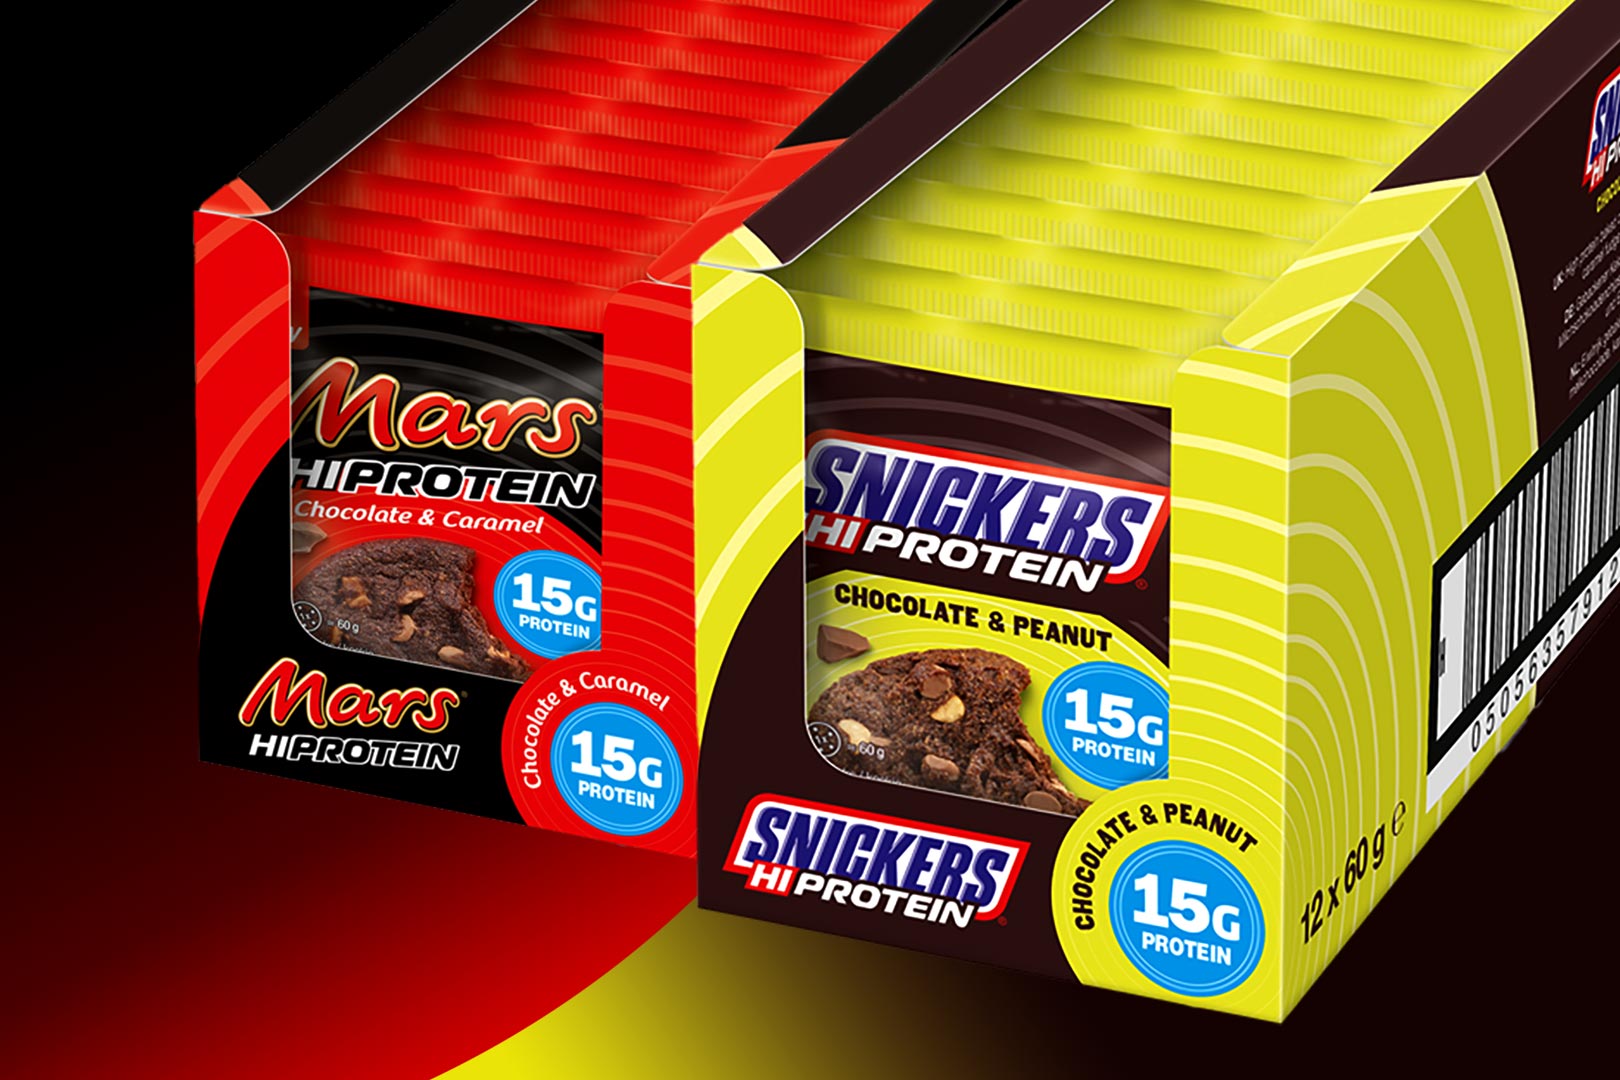 Mars keeps the excitement rolling introducing authentic Mars and Snickers high-protein cookies